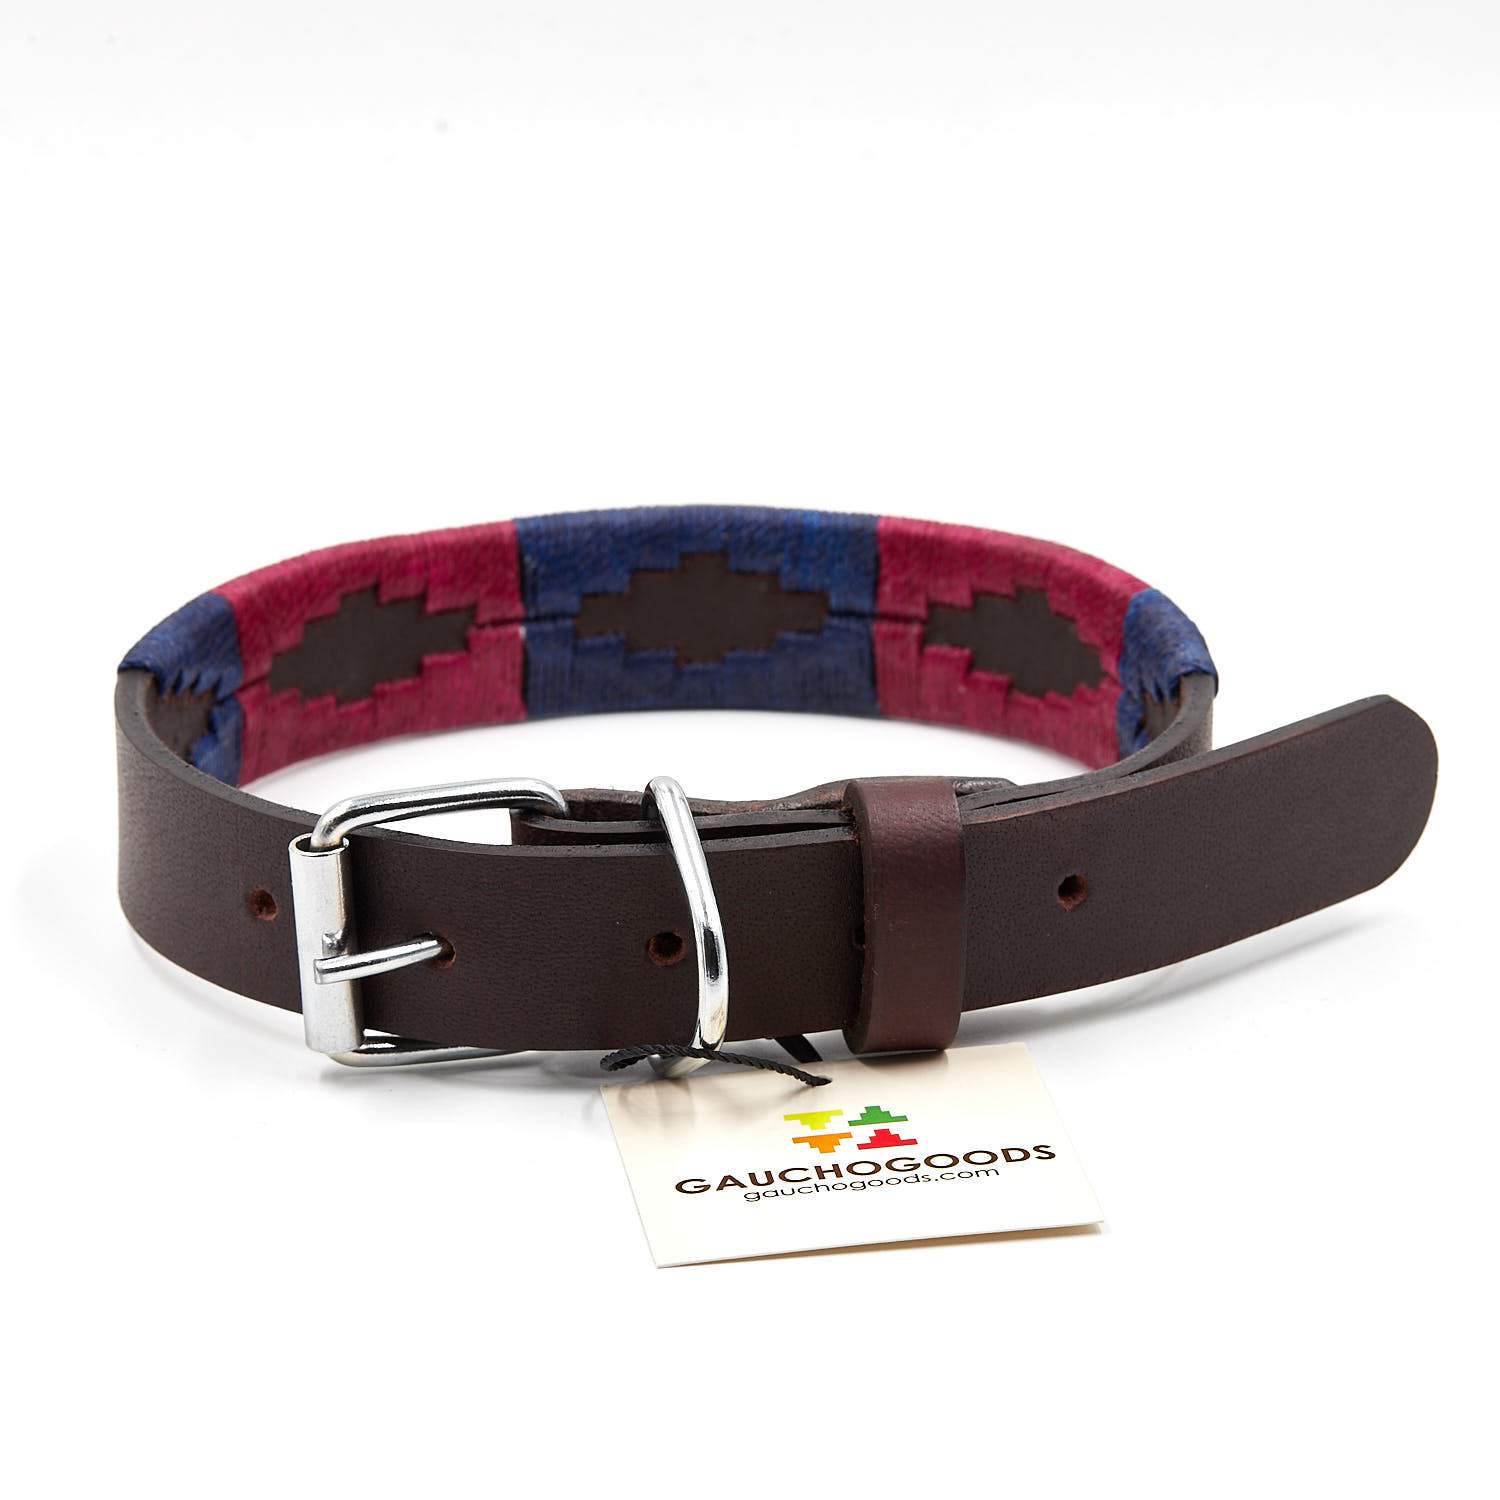 Napa Valley Leather Dog Collar - hand-stitched with purple and navy blue colors